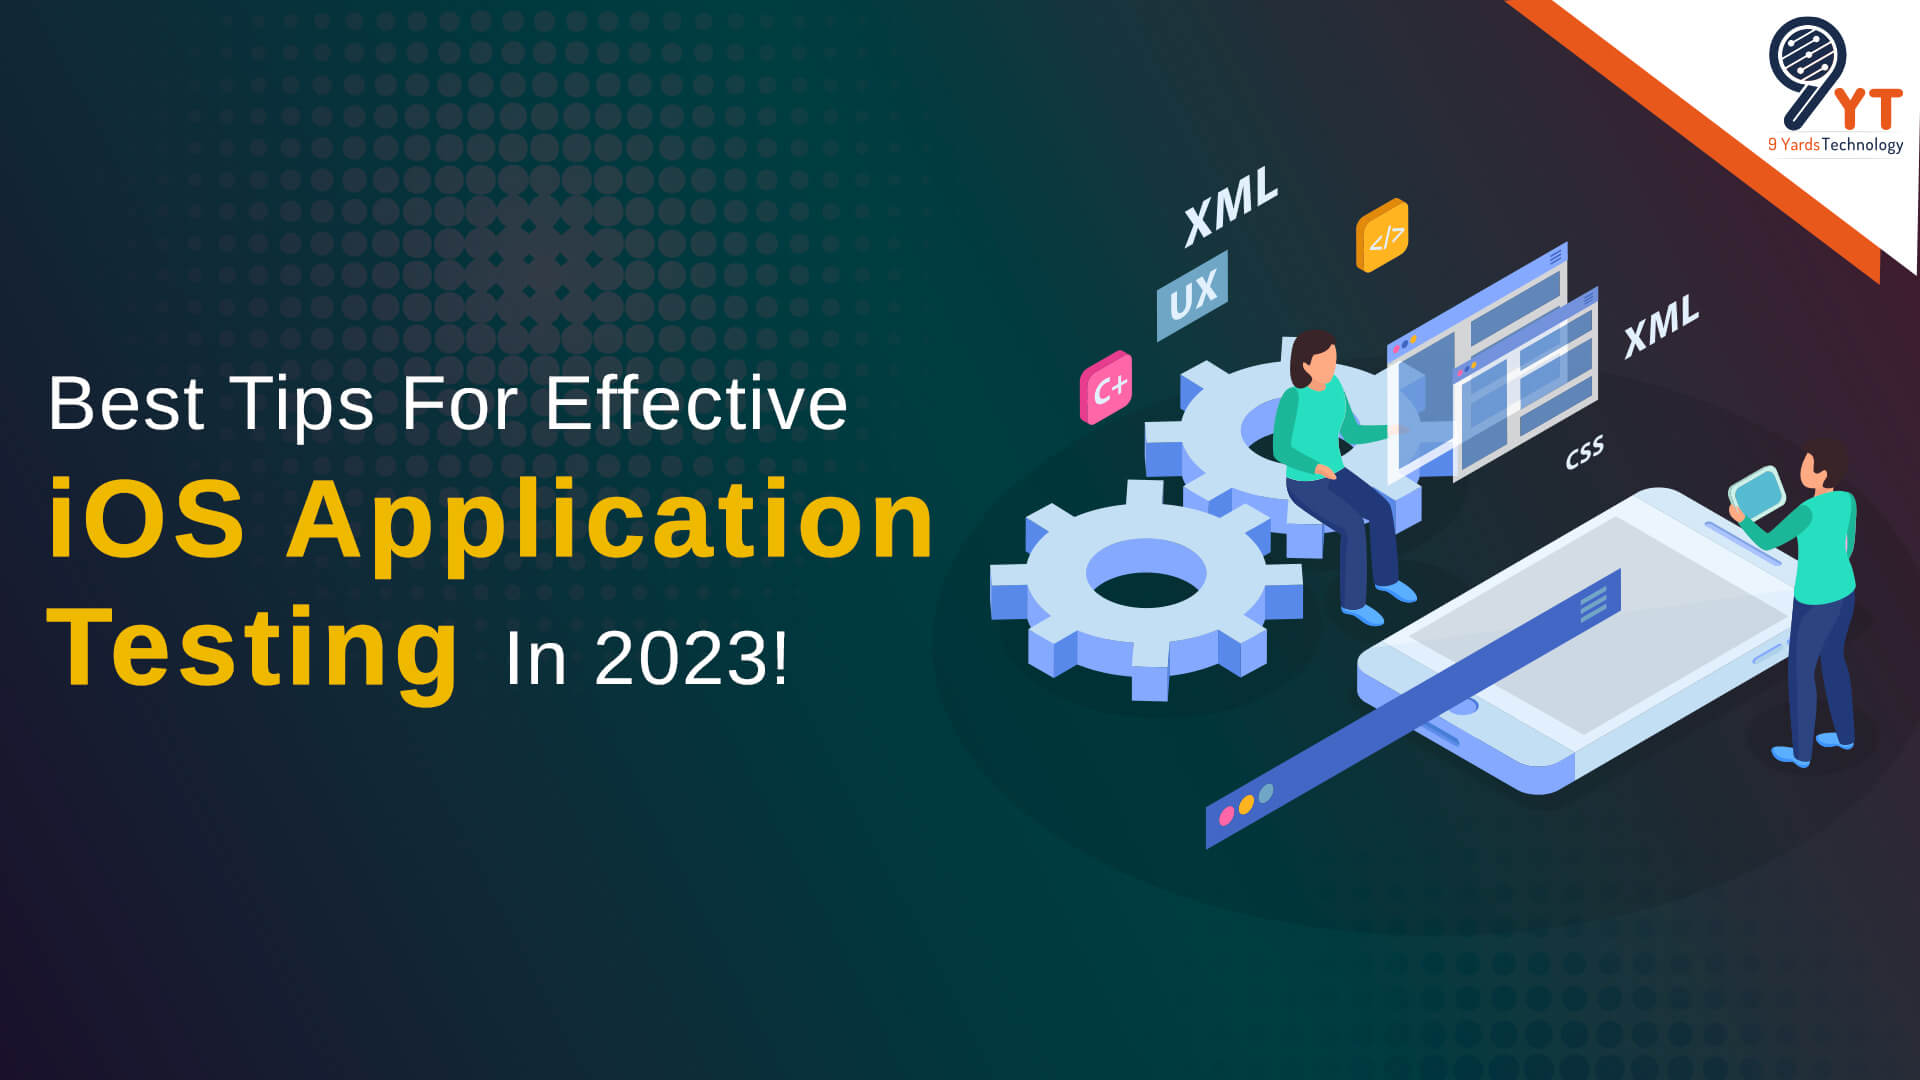 Best Tips For Effective iOS Application Testing in 2023!